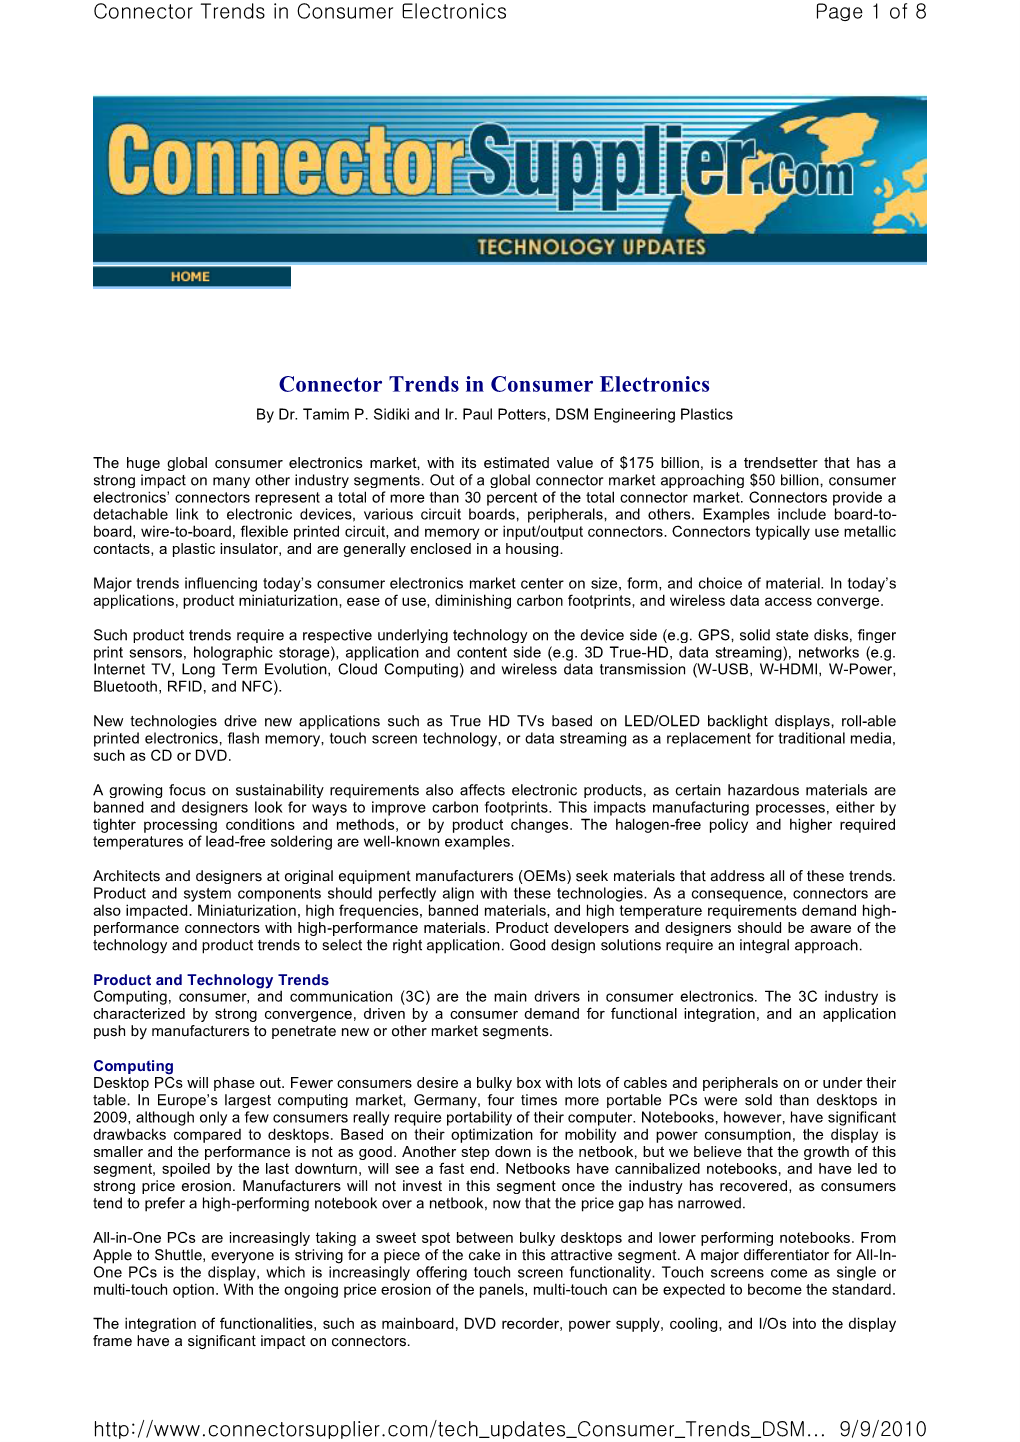 Connector Trends in Consumer Electronics Page 1 of 8